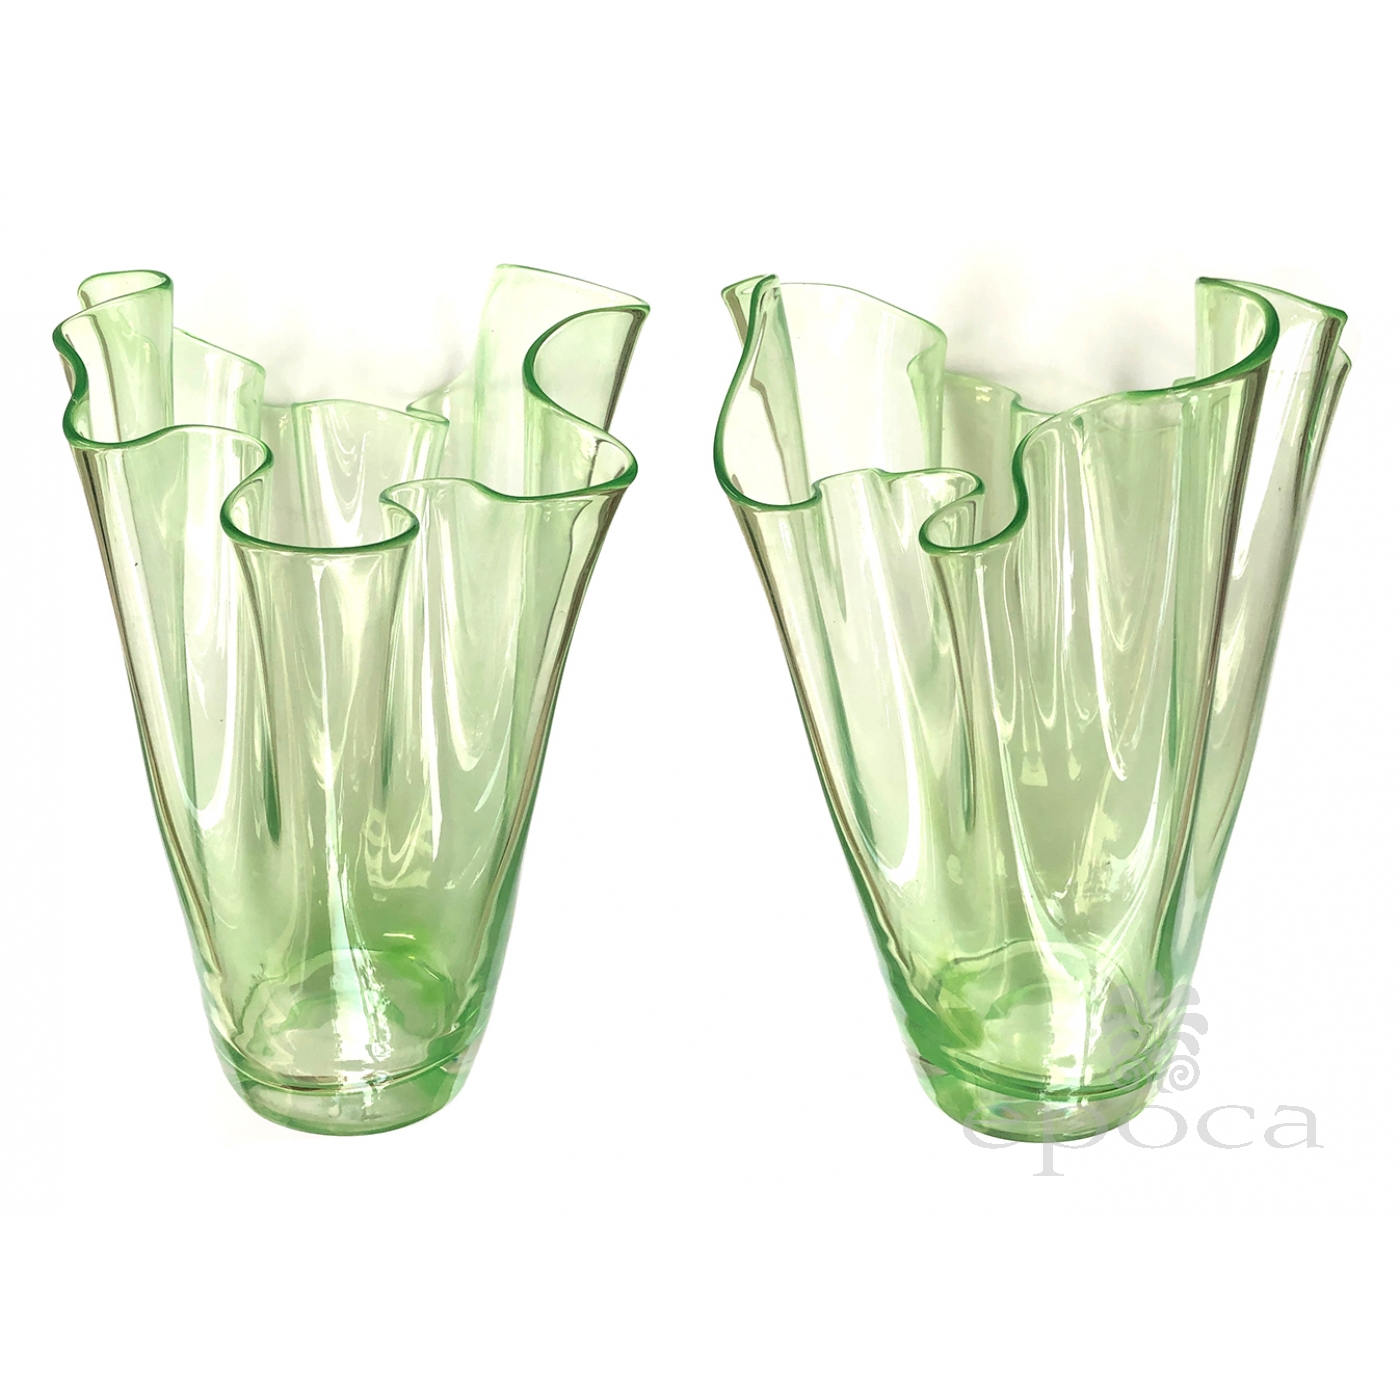 A Shapely Pair Of Murano Art Deco Chartreuse Glass Handkerchief Vases Epoca  Antiques & 20Th Century Furnishings San Francisco